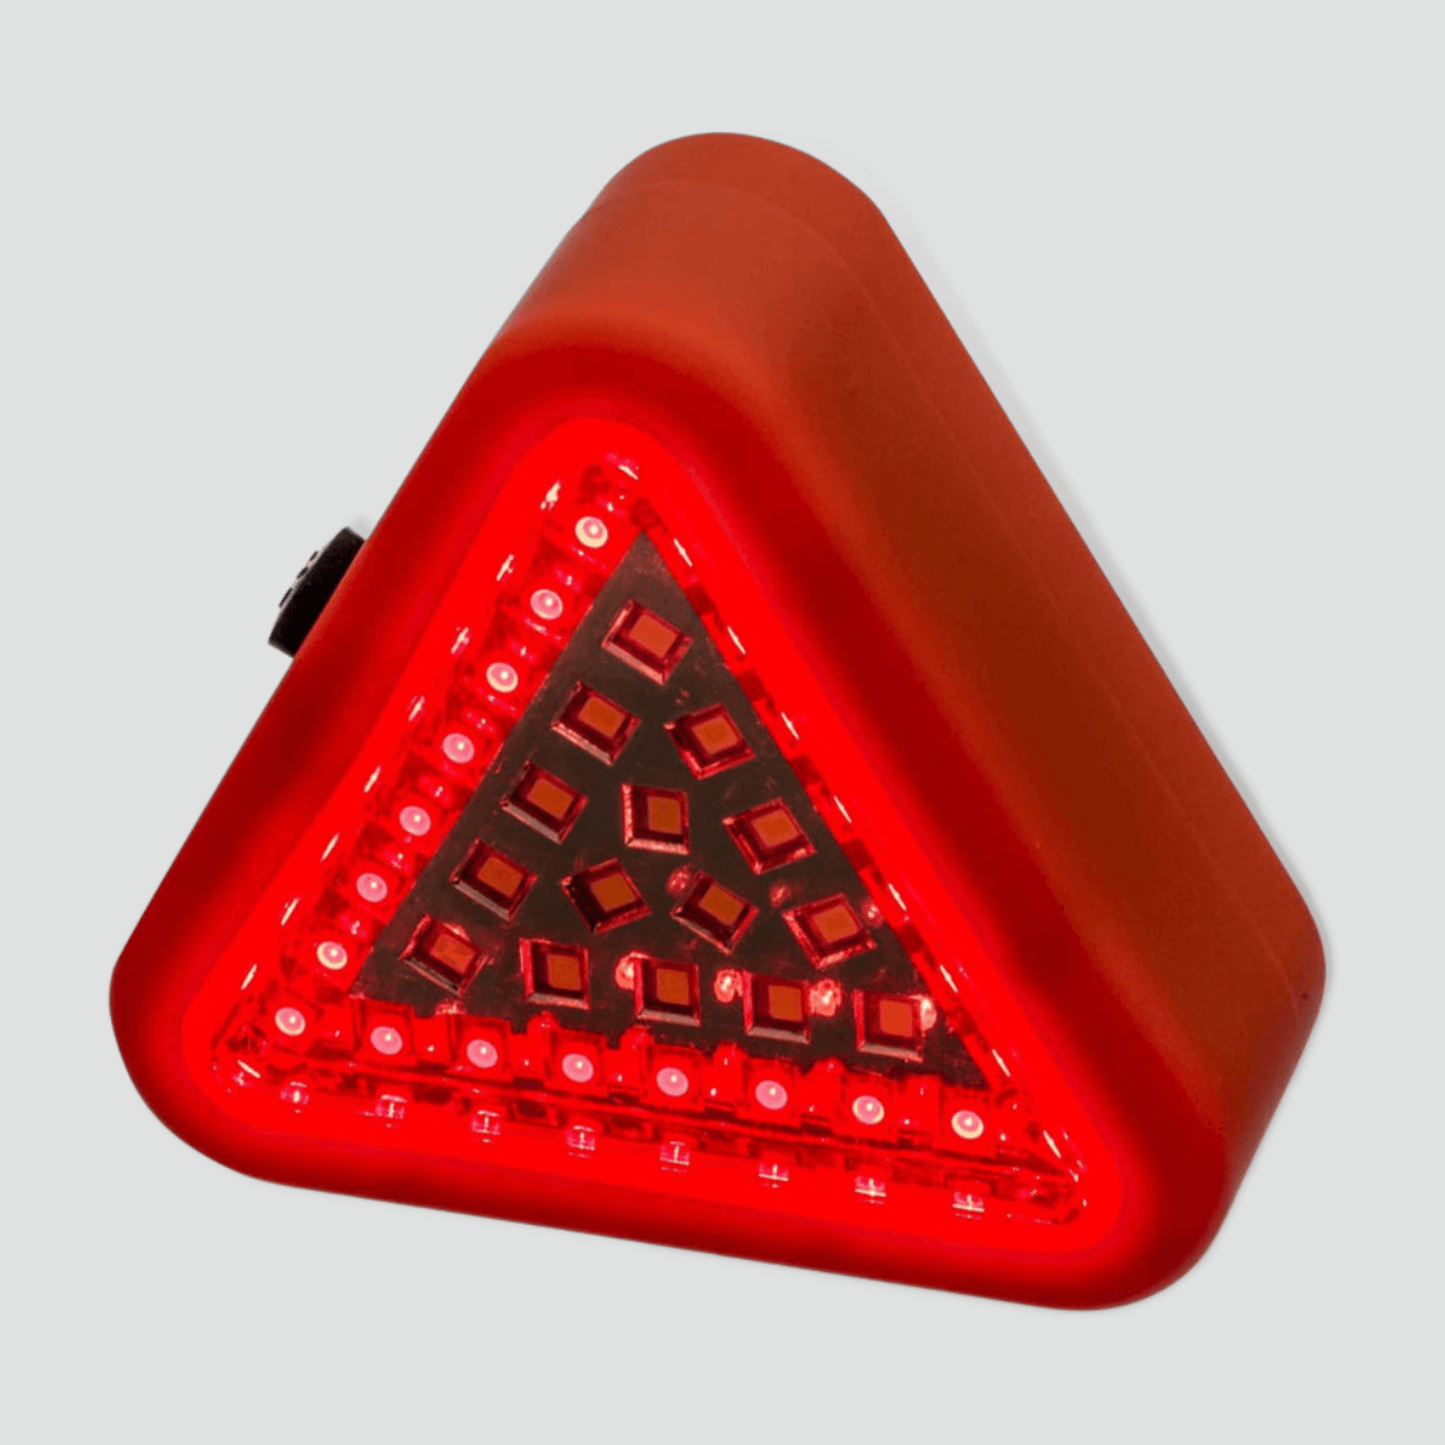 Orange safety triangle light with red light on